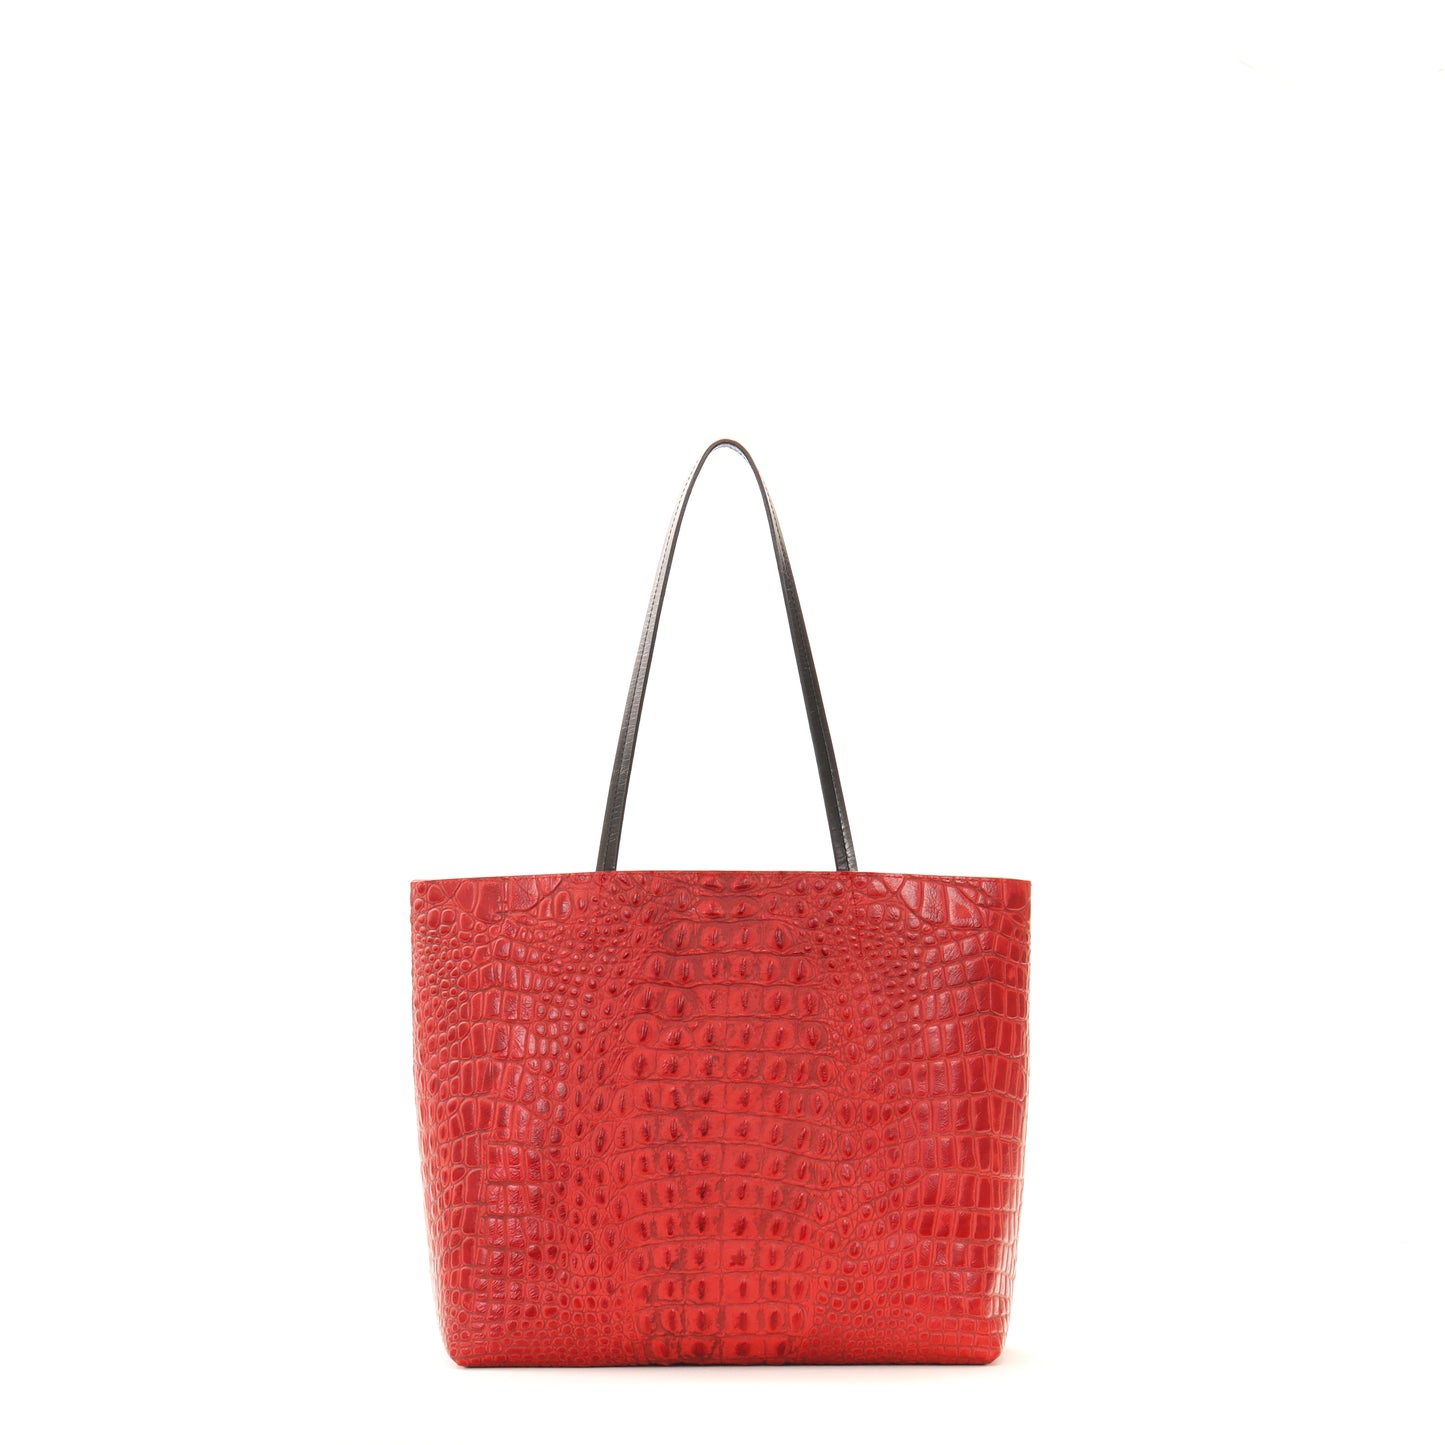 ESSENTIAL TOTE POMPEIAN RED EMBOSSED CROC